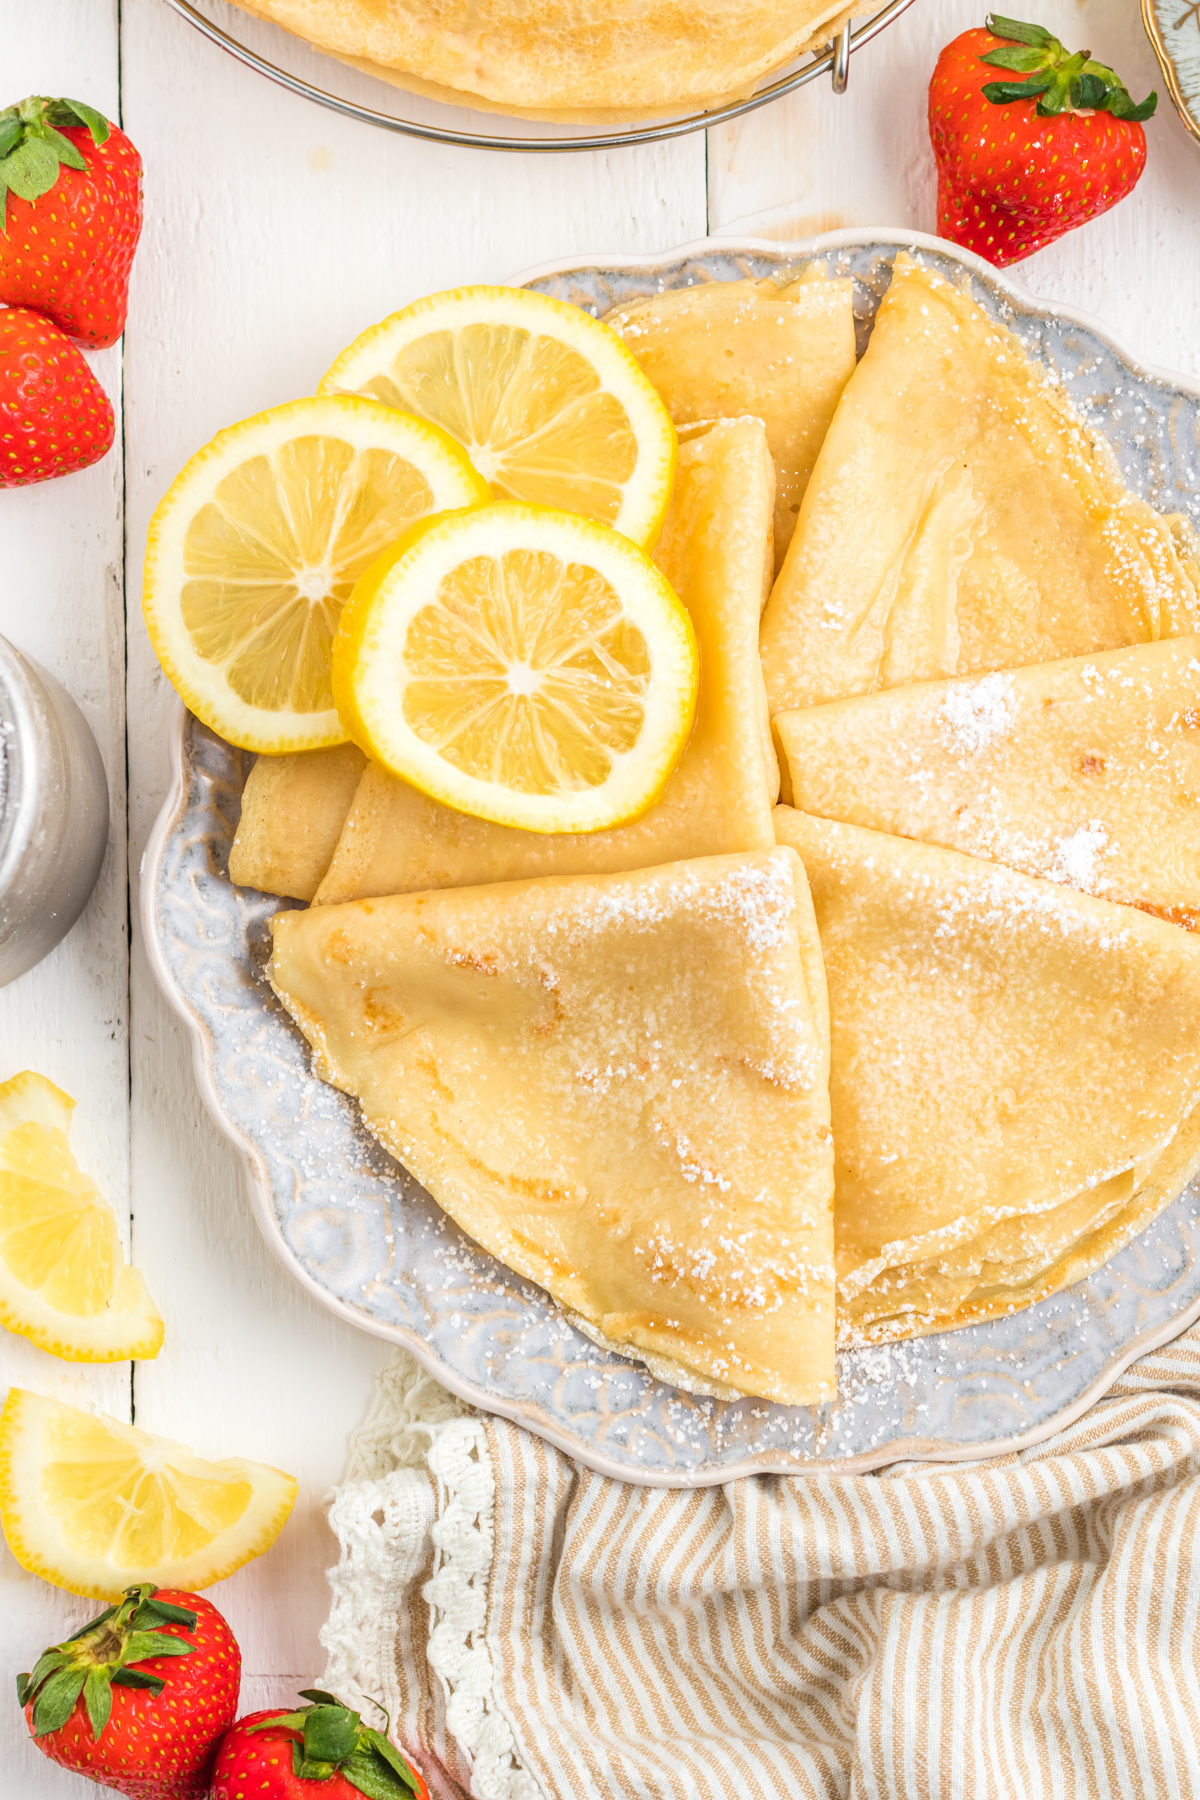 parisian crepes on a plate with lemon slices and strawberries on the table.